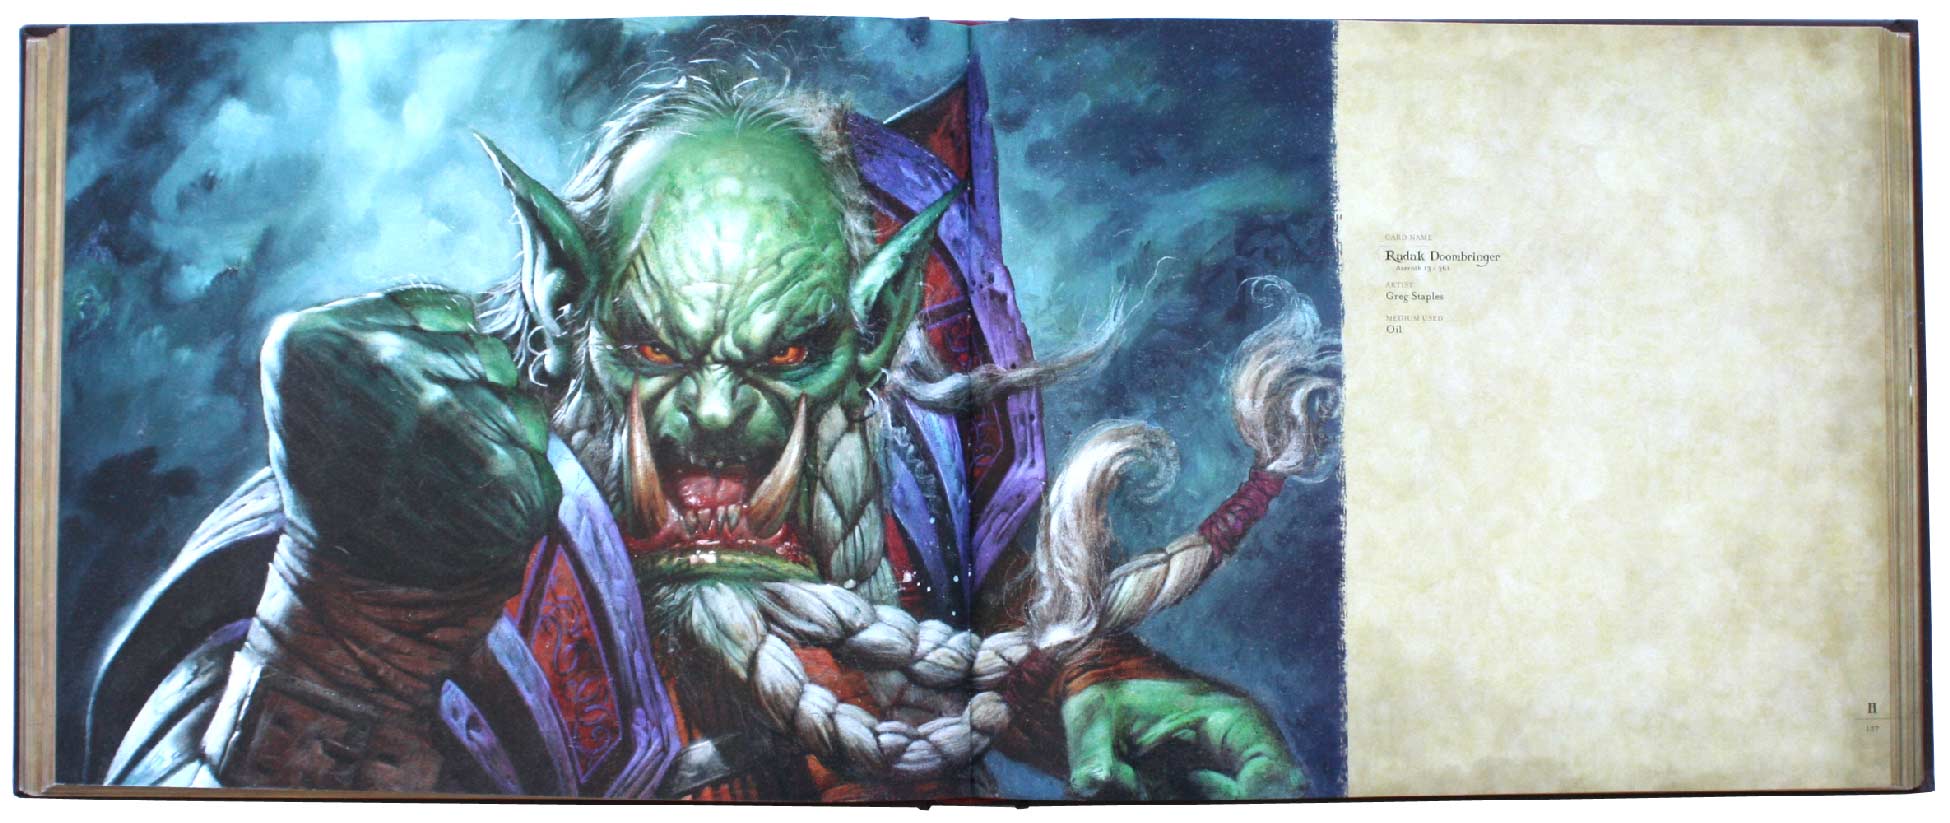 page 126 et 127 de l'art book : The Art of the Trading Card Game (World of Wacraft)